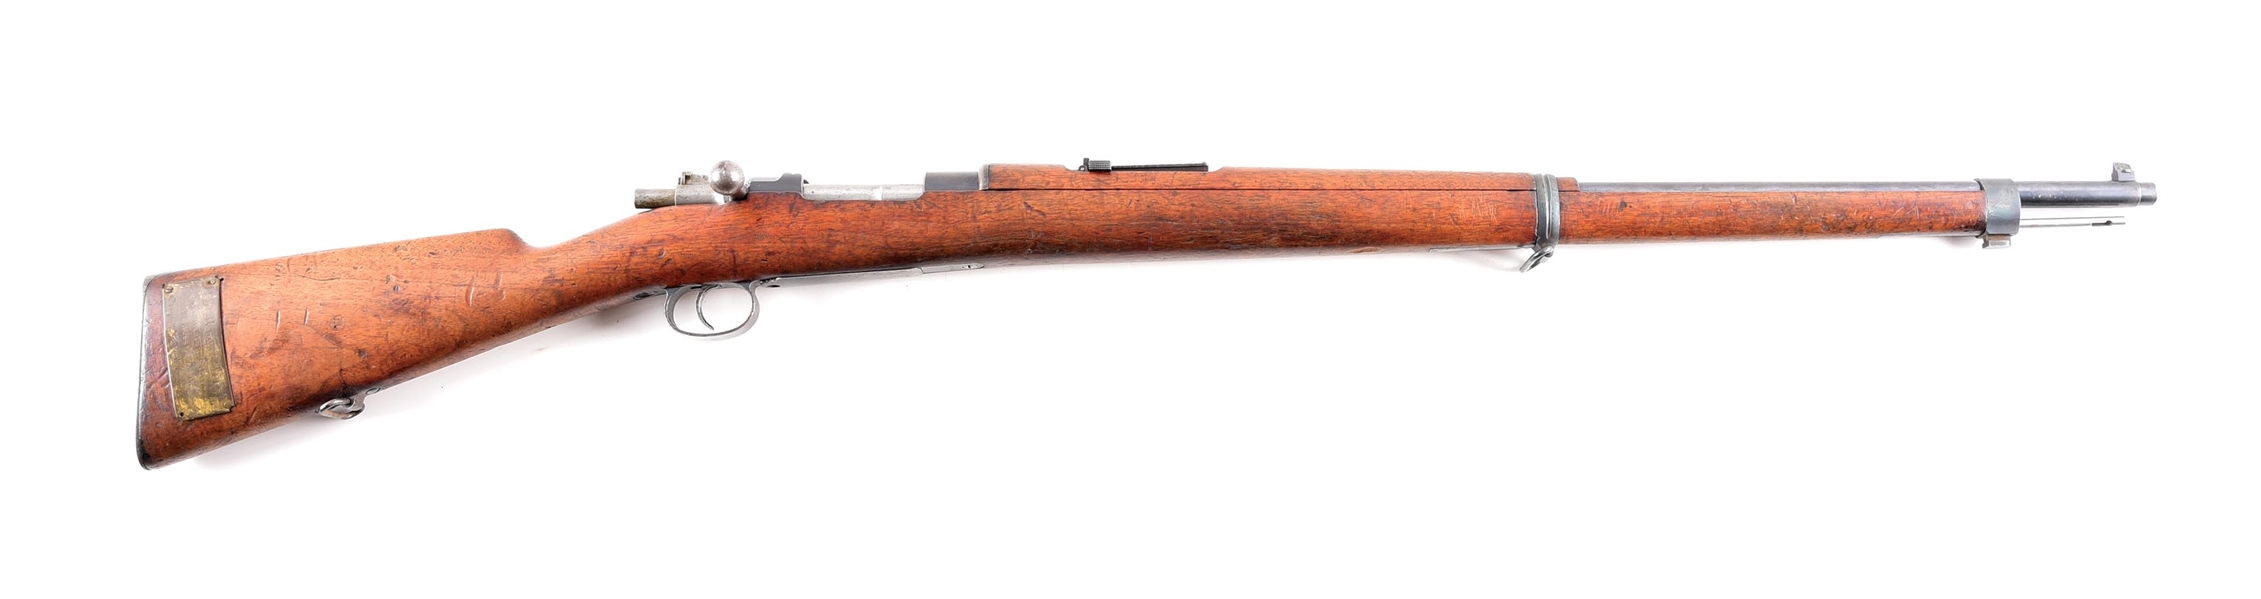 (A) HISTORIC MAUSER MODEL 1895 BOLT ACTION RIFLE MANUFACTURED BY LOEWE AND CAPTURED BY ROYAL IRISH REGIMENT "PADDYS BLACKGUARDS" DURING THE SECOND BOER WAR.